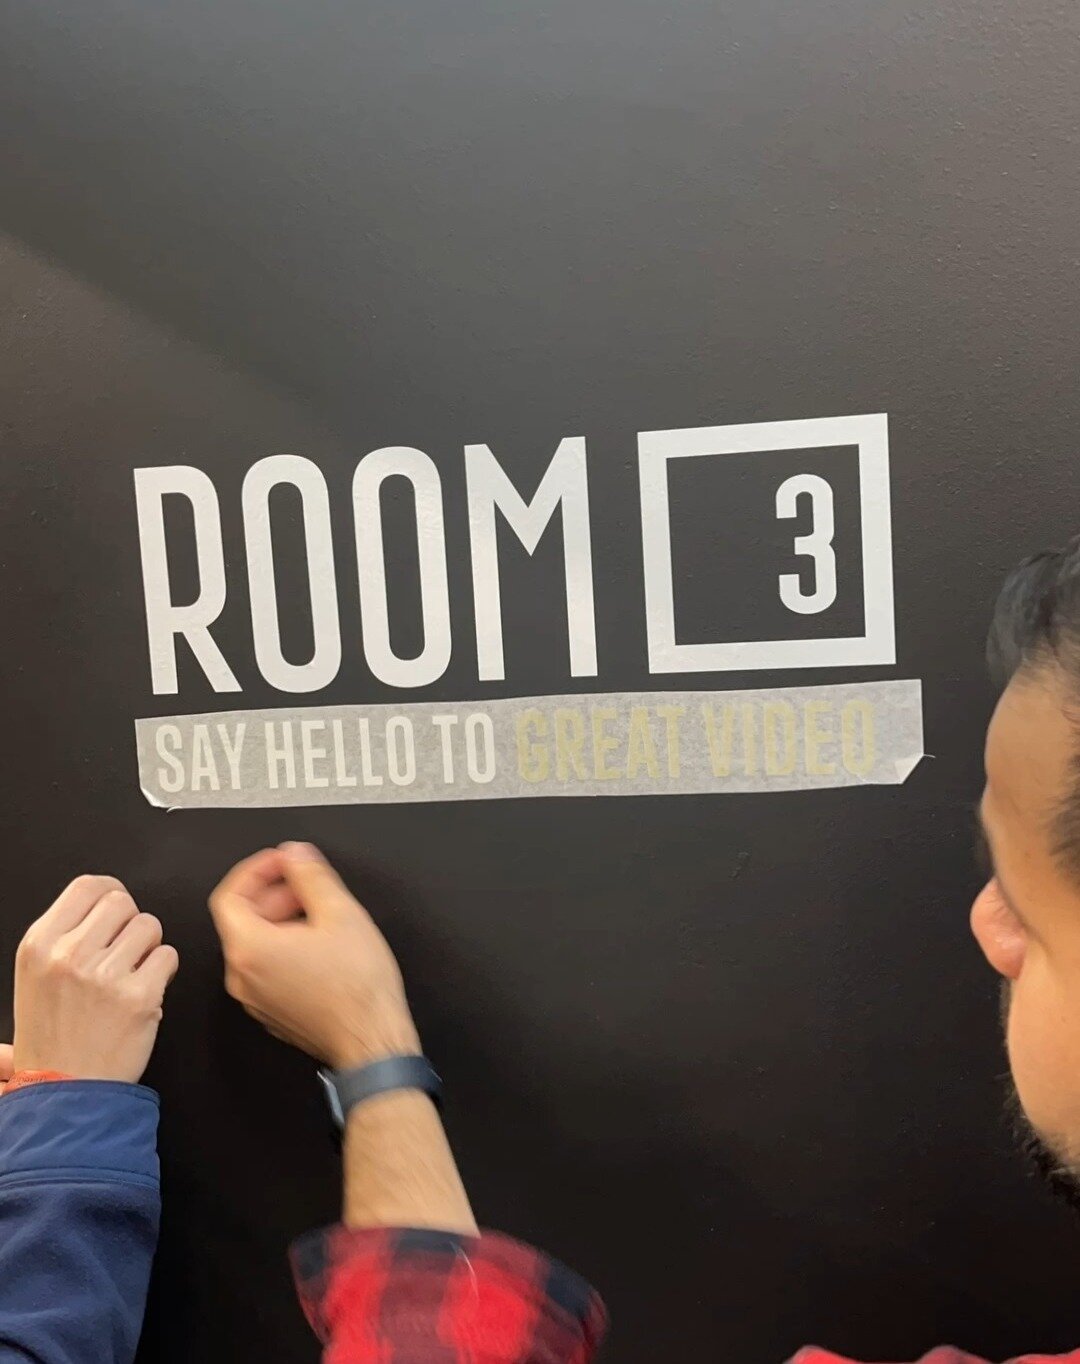 Did you know that we moved into our current studio/office this time last year? Hard to believe it&rsquo;s already been a year but we&rsquo;ve made it a home since then. Enjoy this throwback from when we were settling in!
.
.
.
#room3 #Room3nyc #Chels